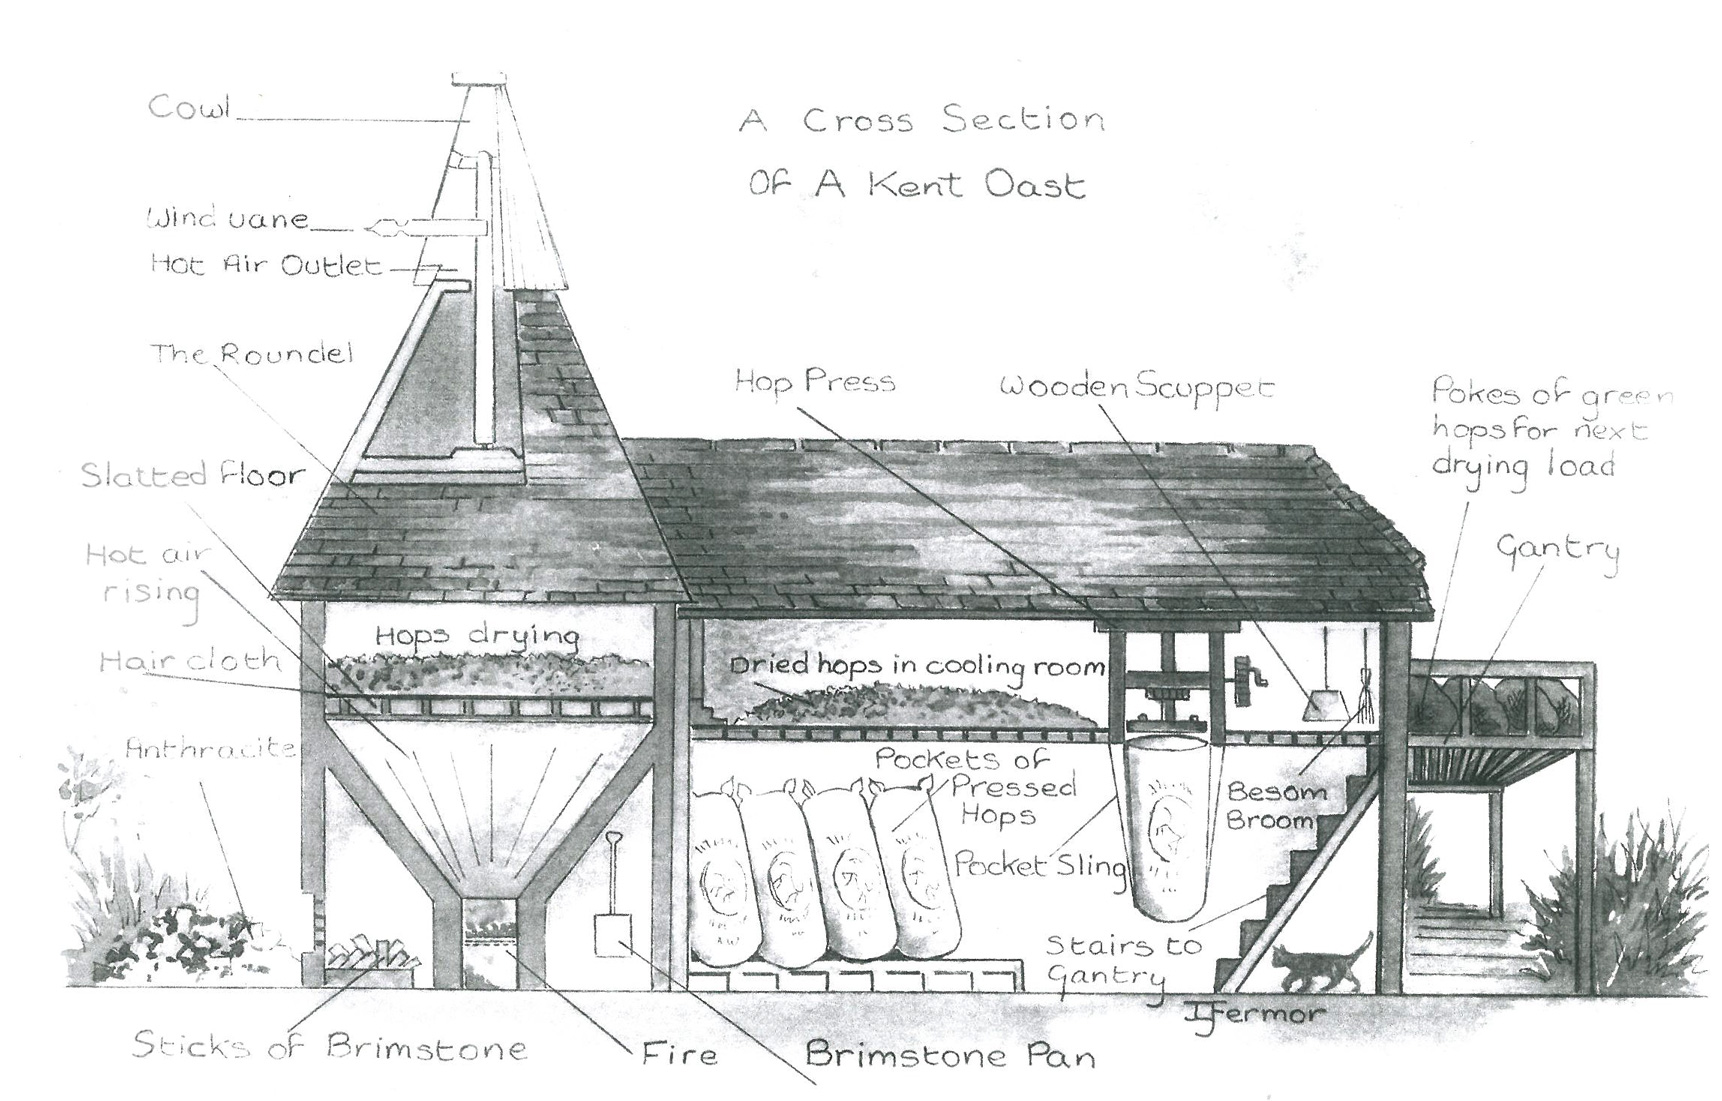 A Cross-Section of a Kent Oast. Image courtesy of Hopping Down in Kent.